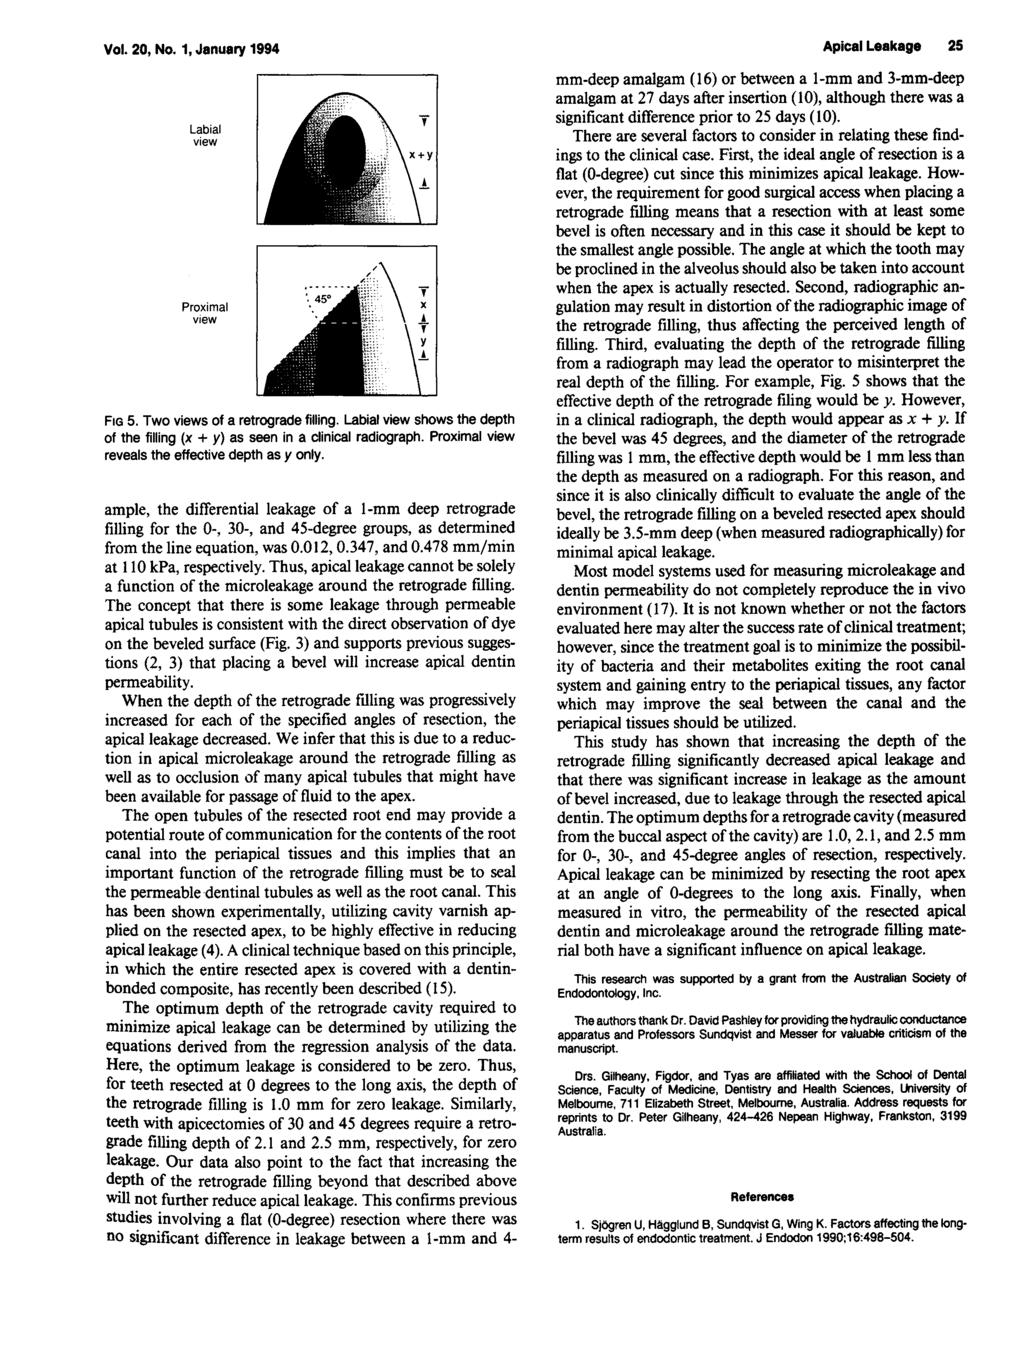 Vol. 20, No. 1, January 1994 Labial Proximal FG 5. Two s of a retrograde filling. Labial shows the depth of the filling (x + y) as seen in a clinical radiograph.